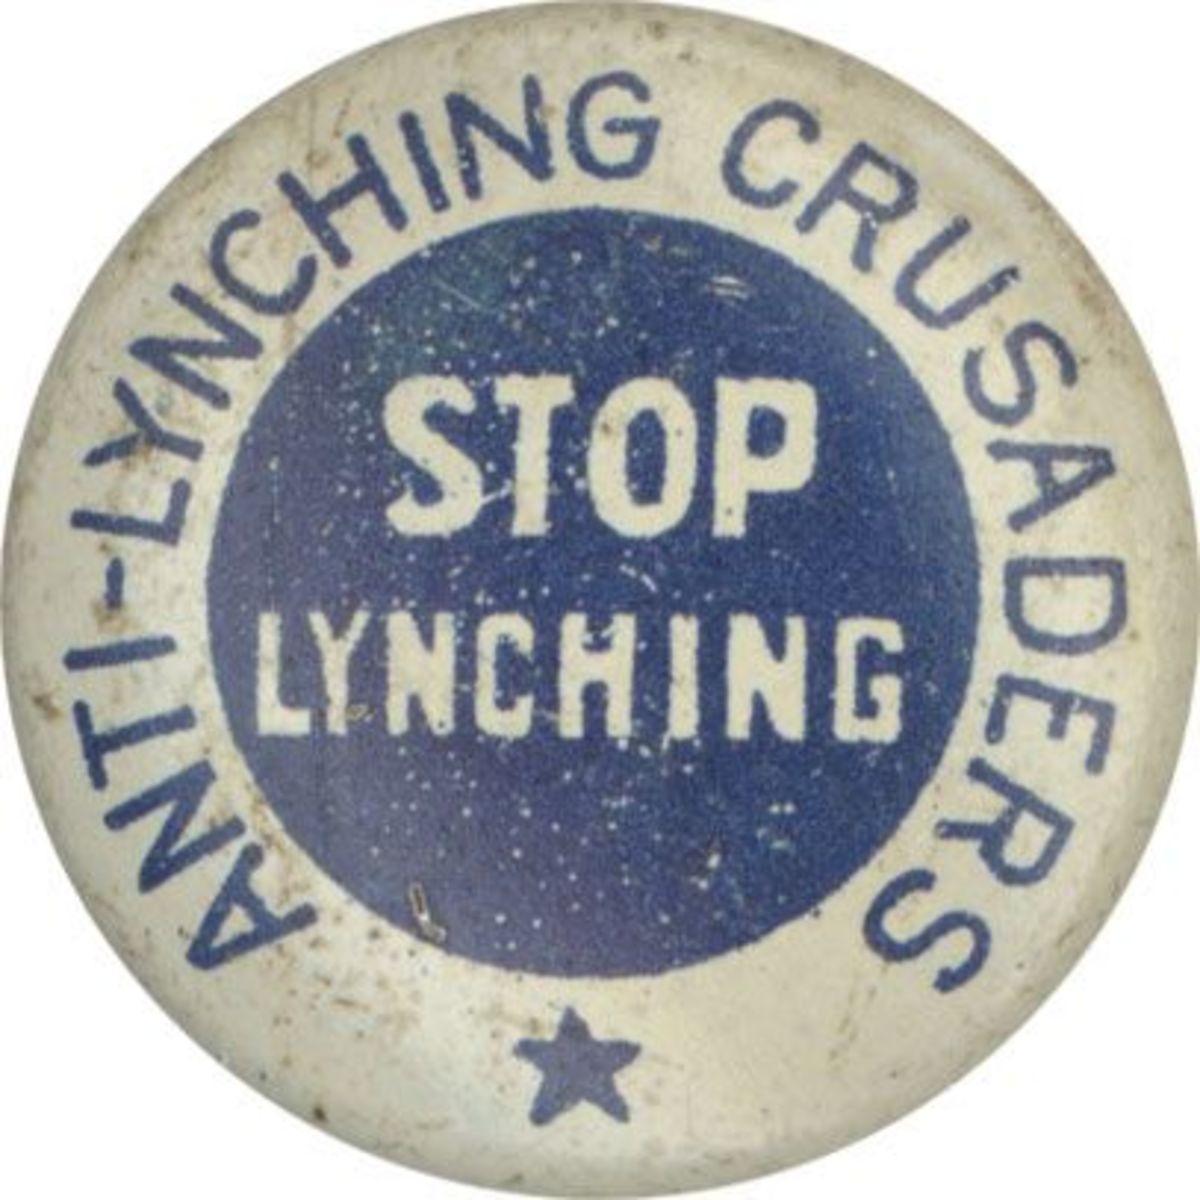 Anti-lynching Crusaders pin.  The anti-lynching crusade was a righteous cause, but some activists, like Ida B. Wells, used deception to achieve their goals.